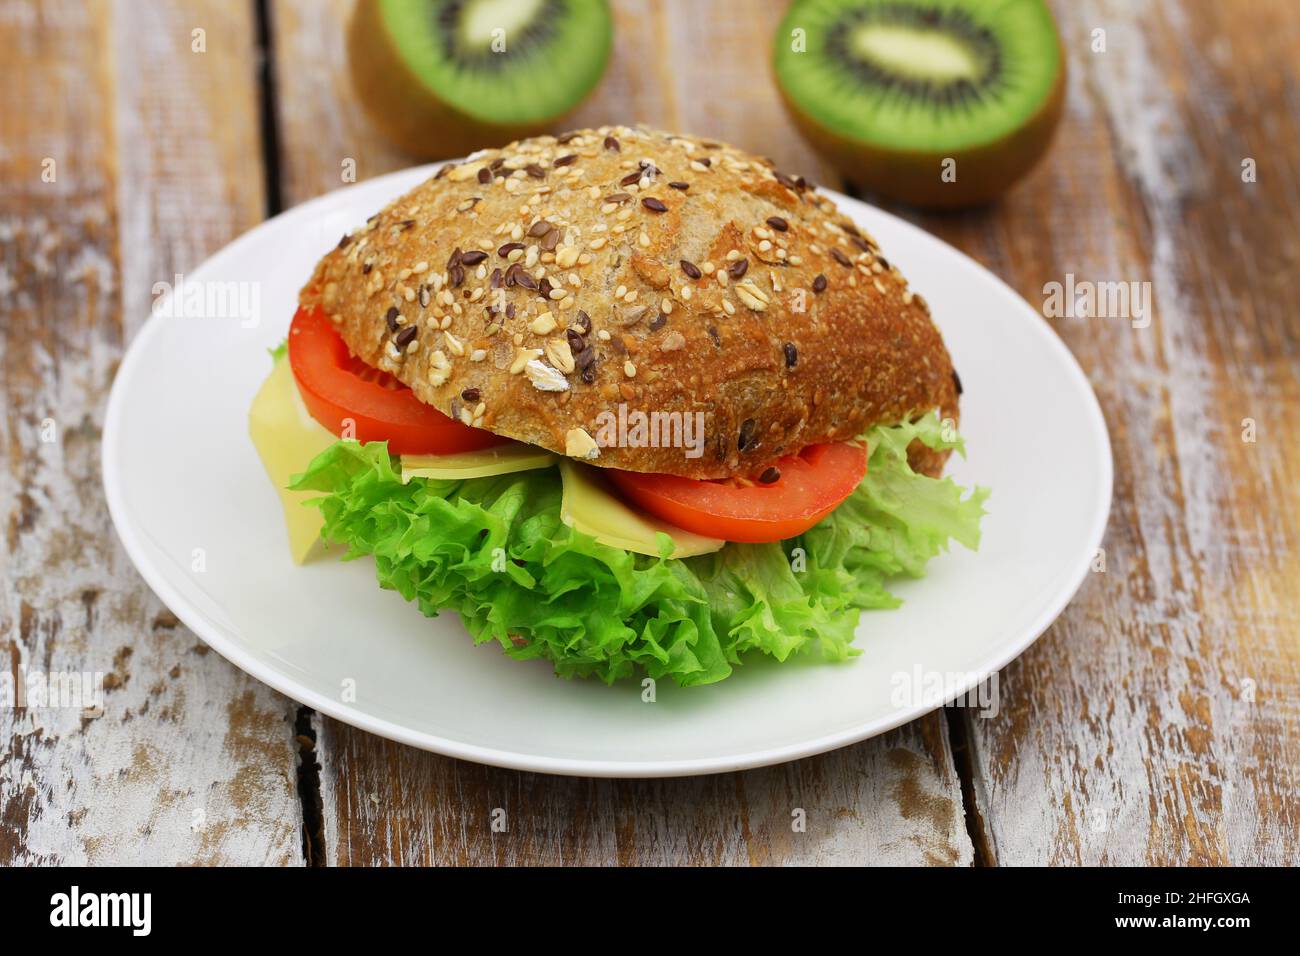 Whole grain roll with cheese, lettuce and tomato on white plate on rustic wood Stock Photo